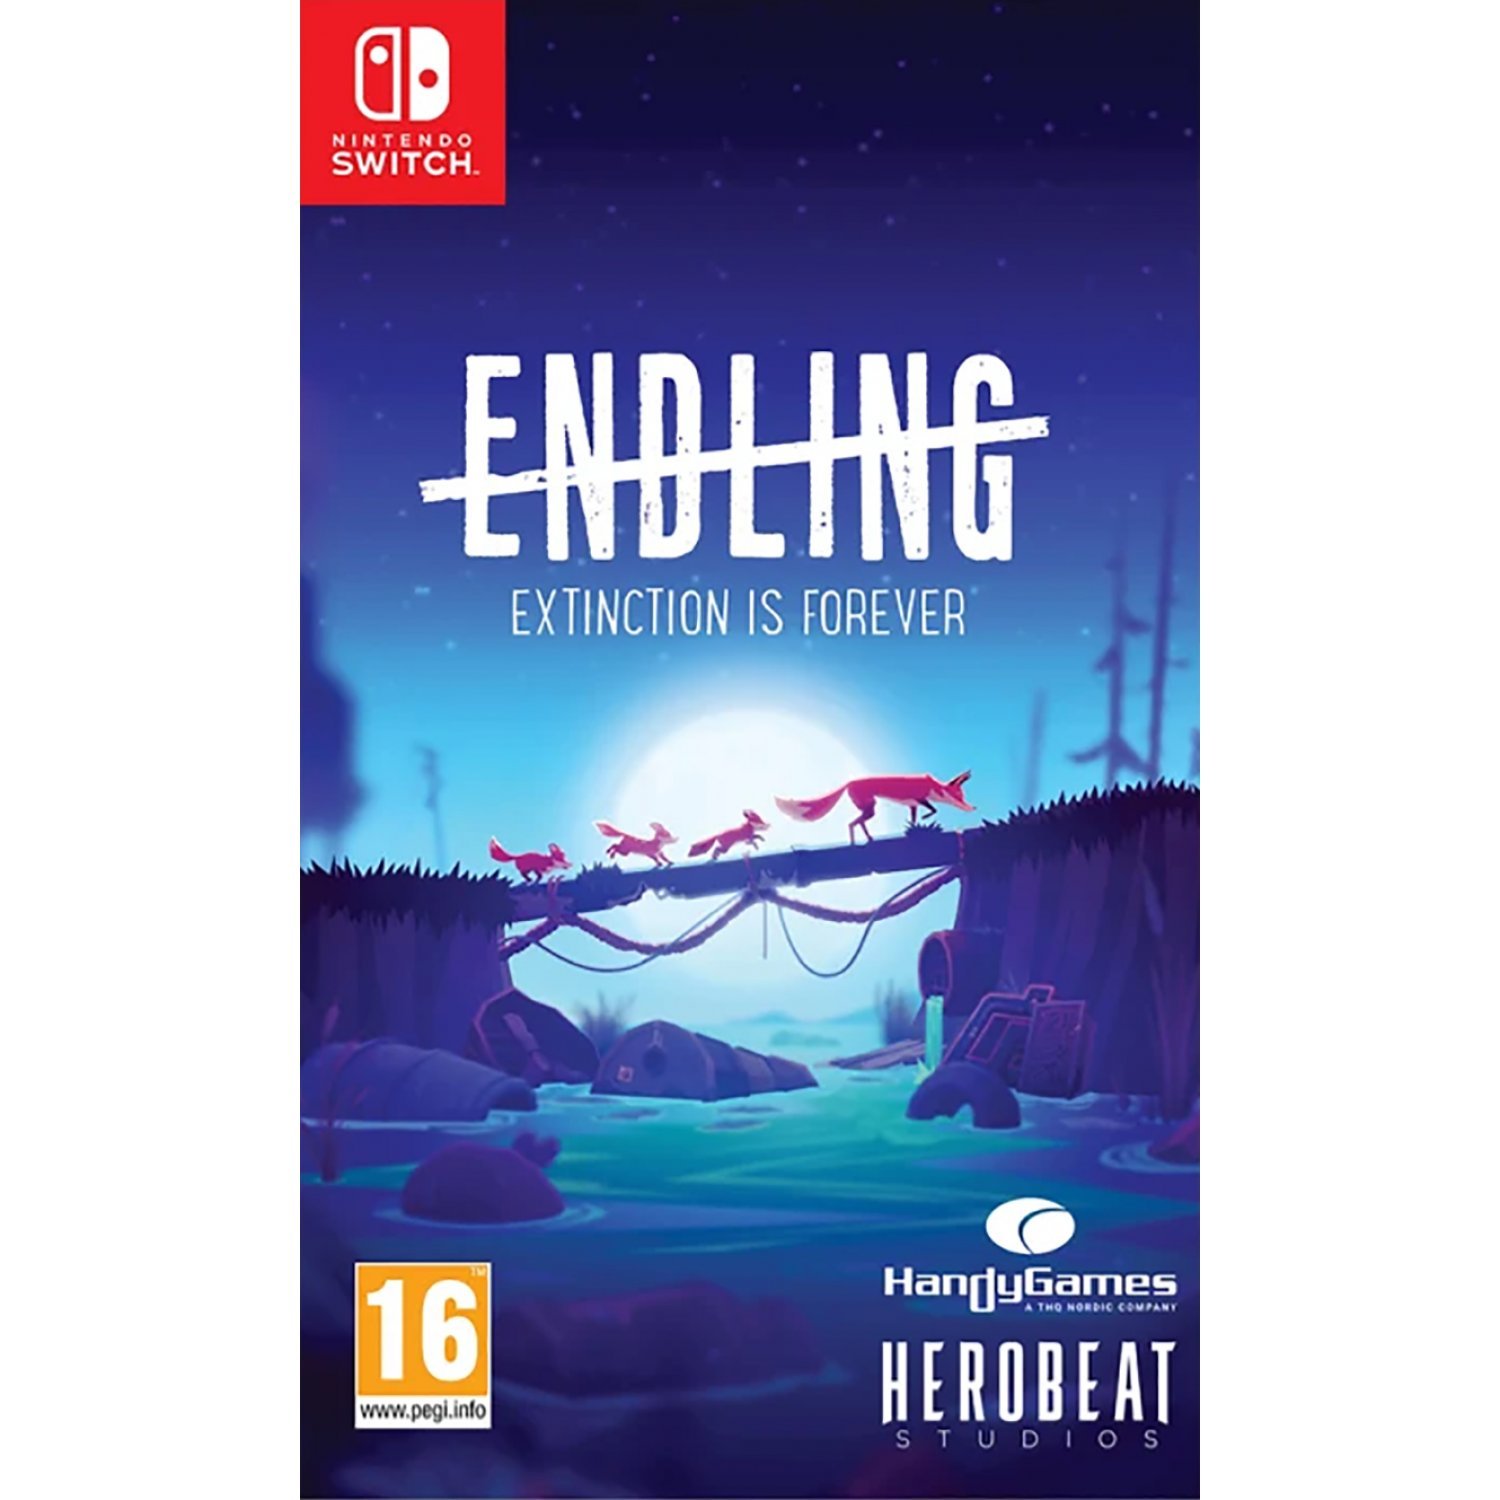 Buy Endling is Forever for Nintendo Switch